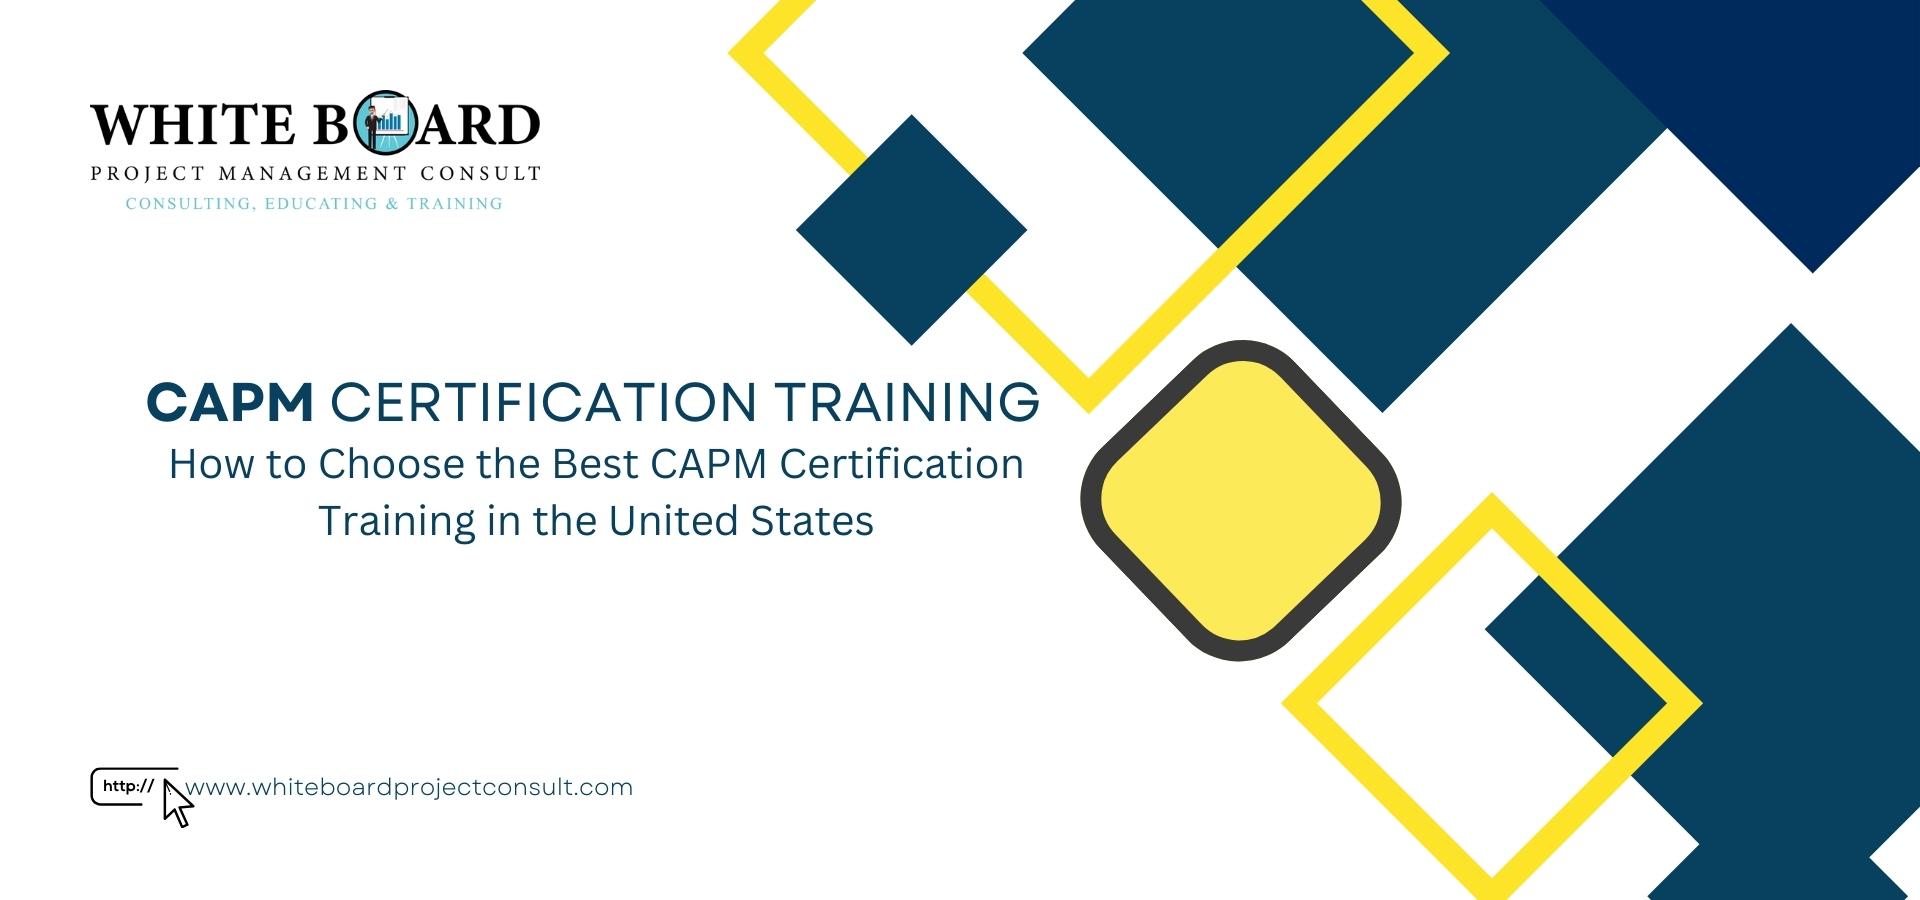 How to Choose the Best CAPM Certification Training in the United States